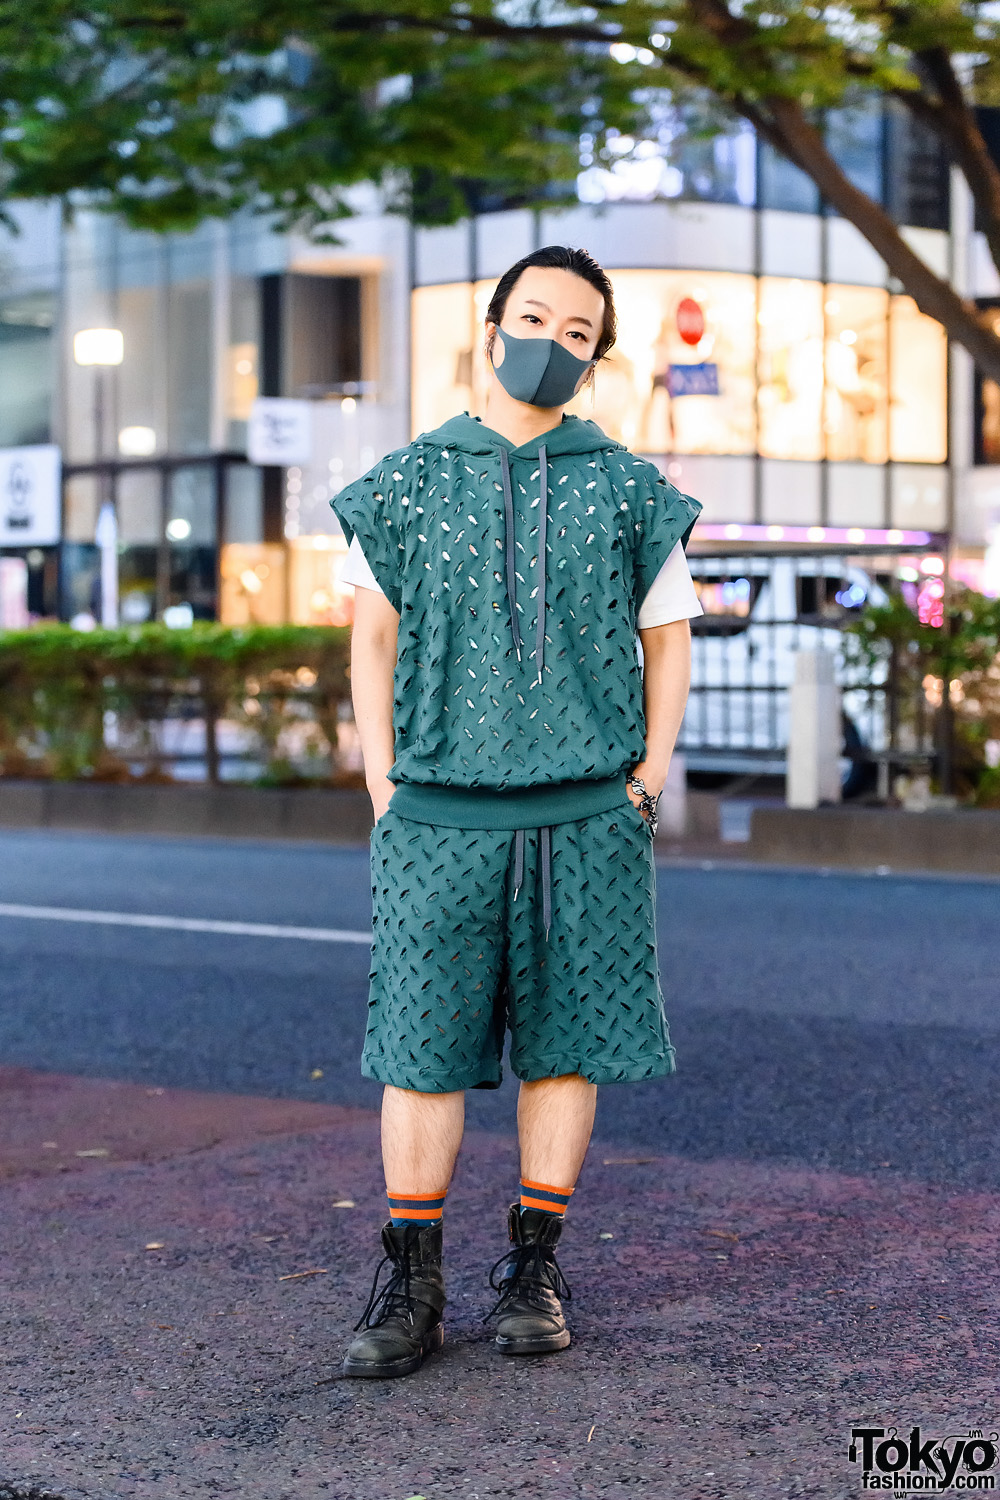 Vivienne Westwood Man Athleisure Style w/ Teal Mask, Slashed Hoodie & Drawstring Shorts, White Tee, Charm Bracelet & Dr. Martens Boots